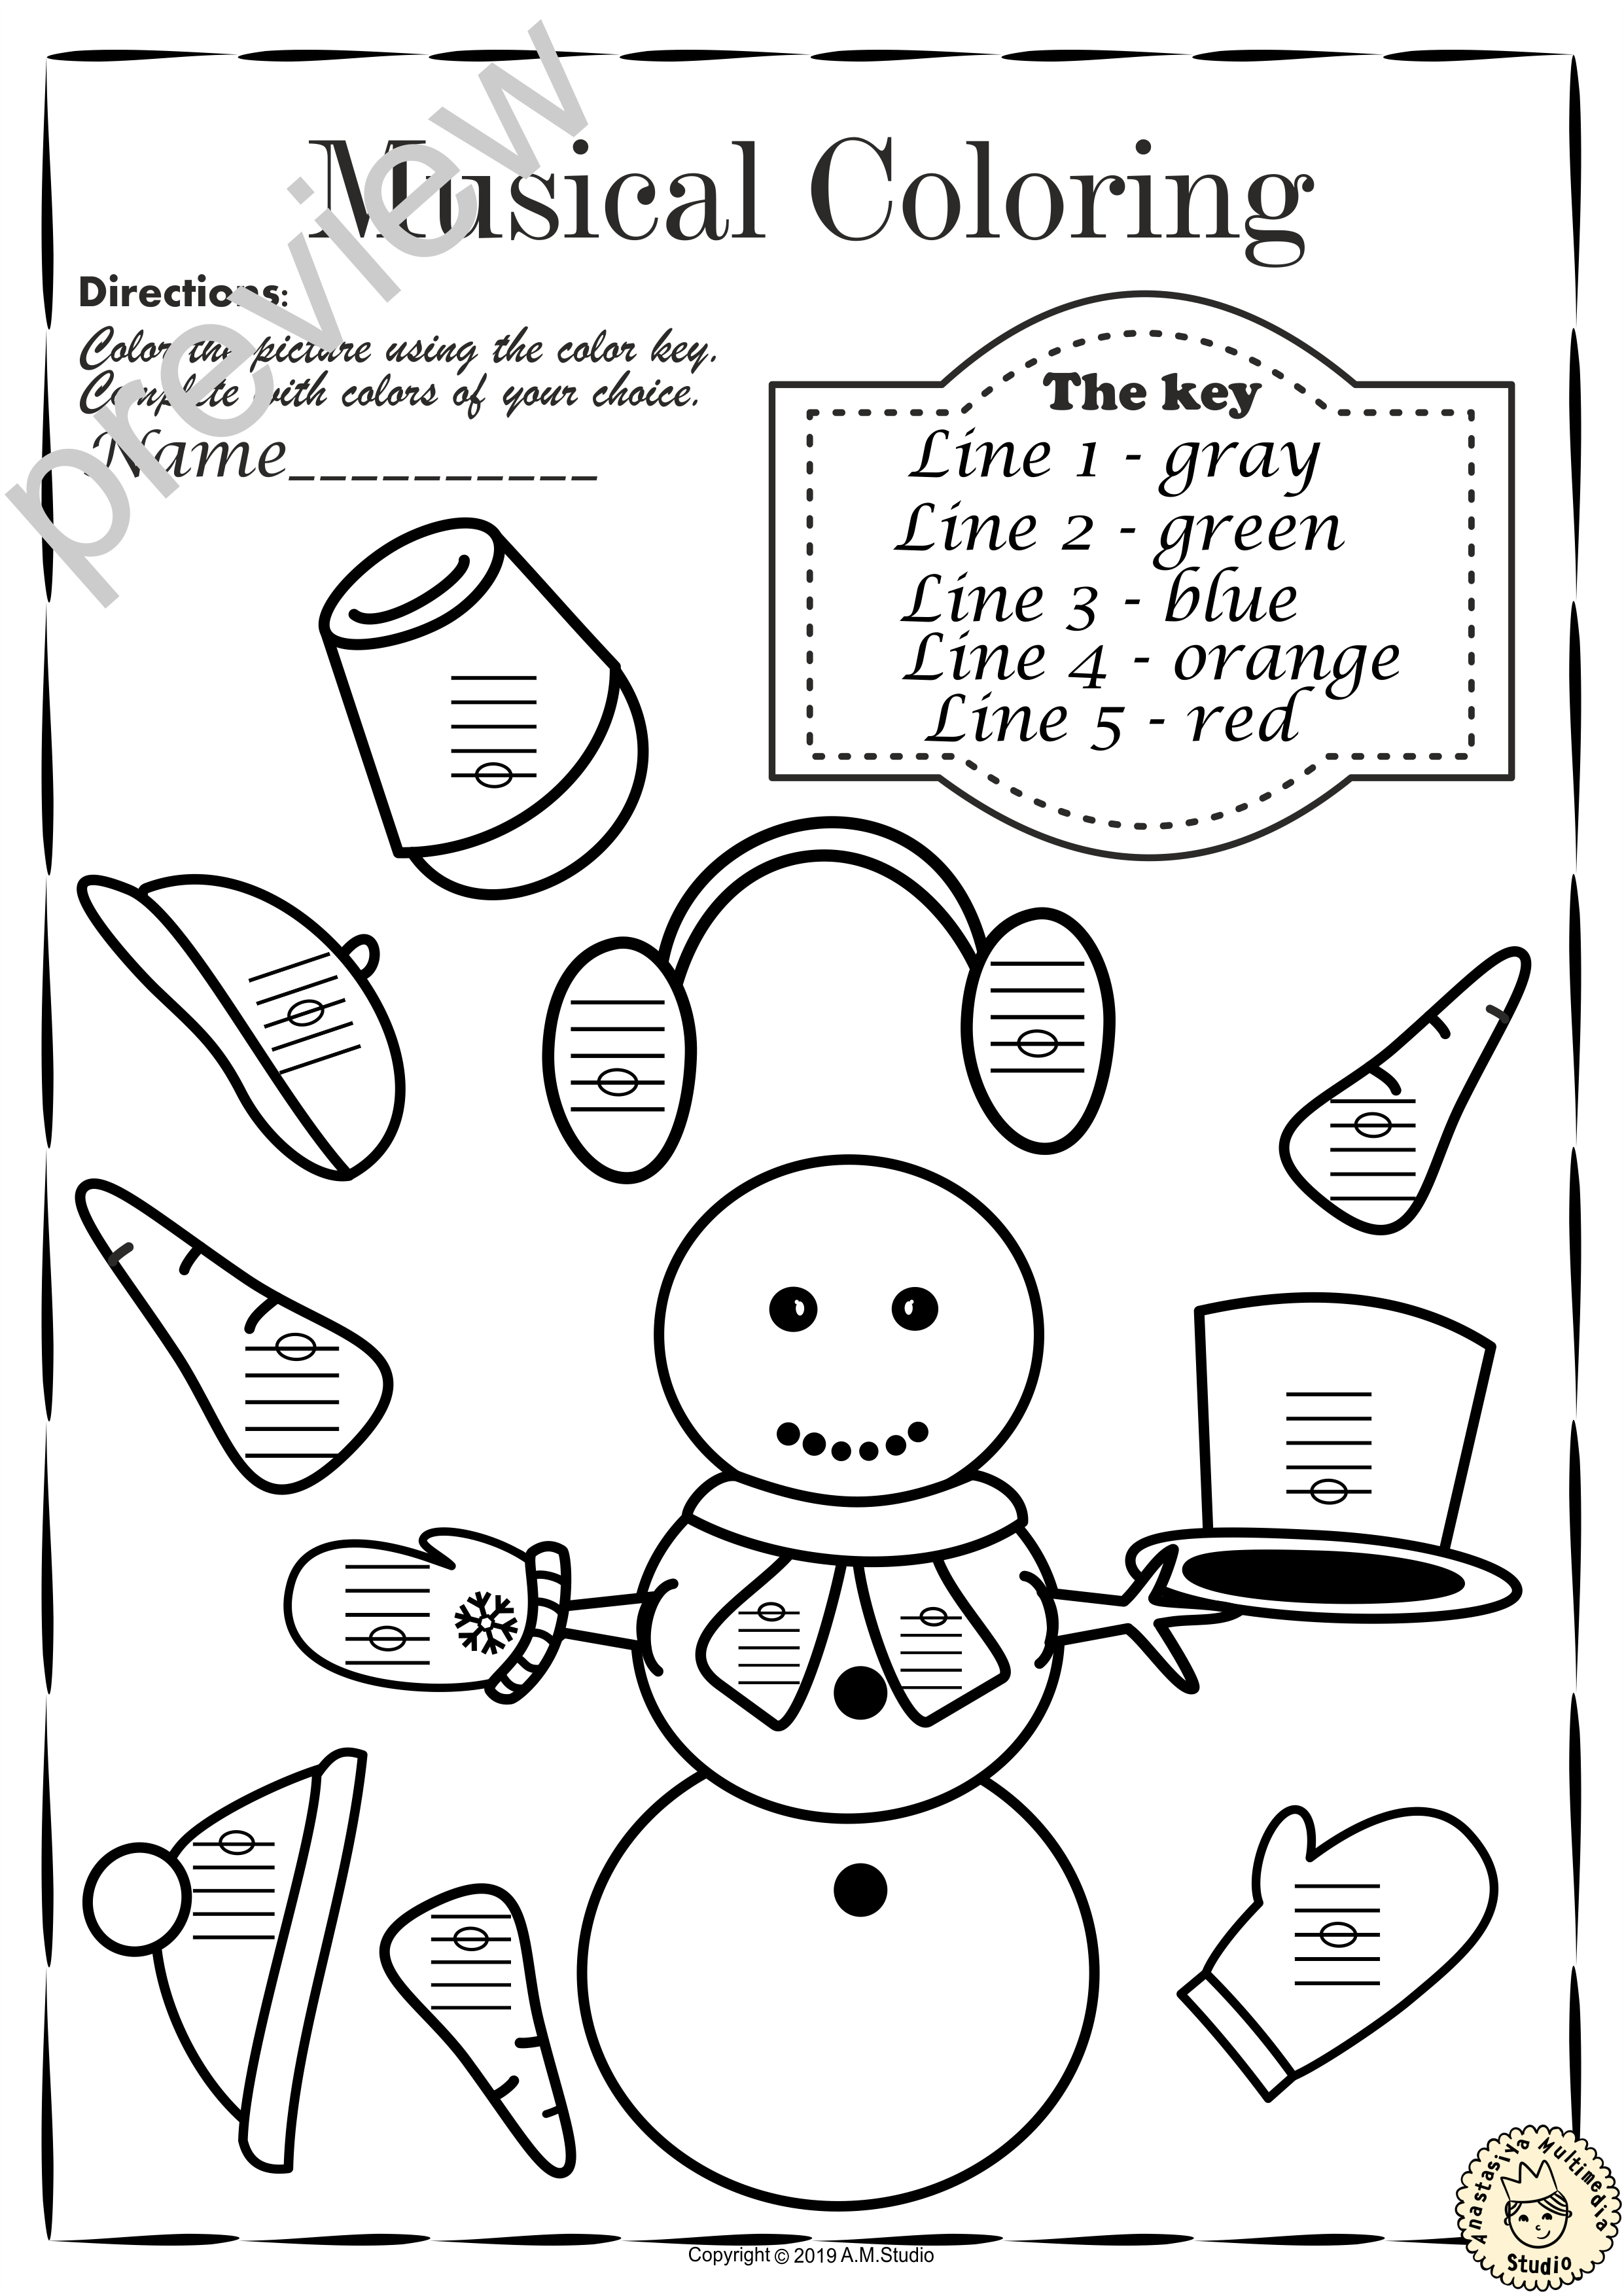 Musical Coloring Pages for Winter {Lines and Spaces} with answers (img # 3)